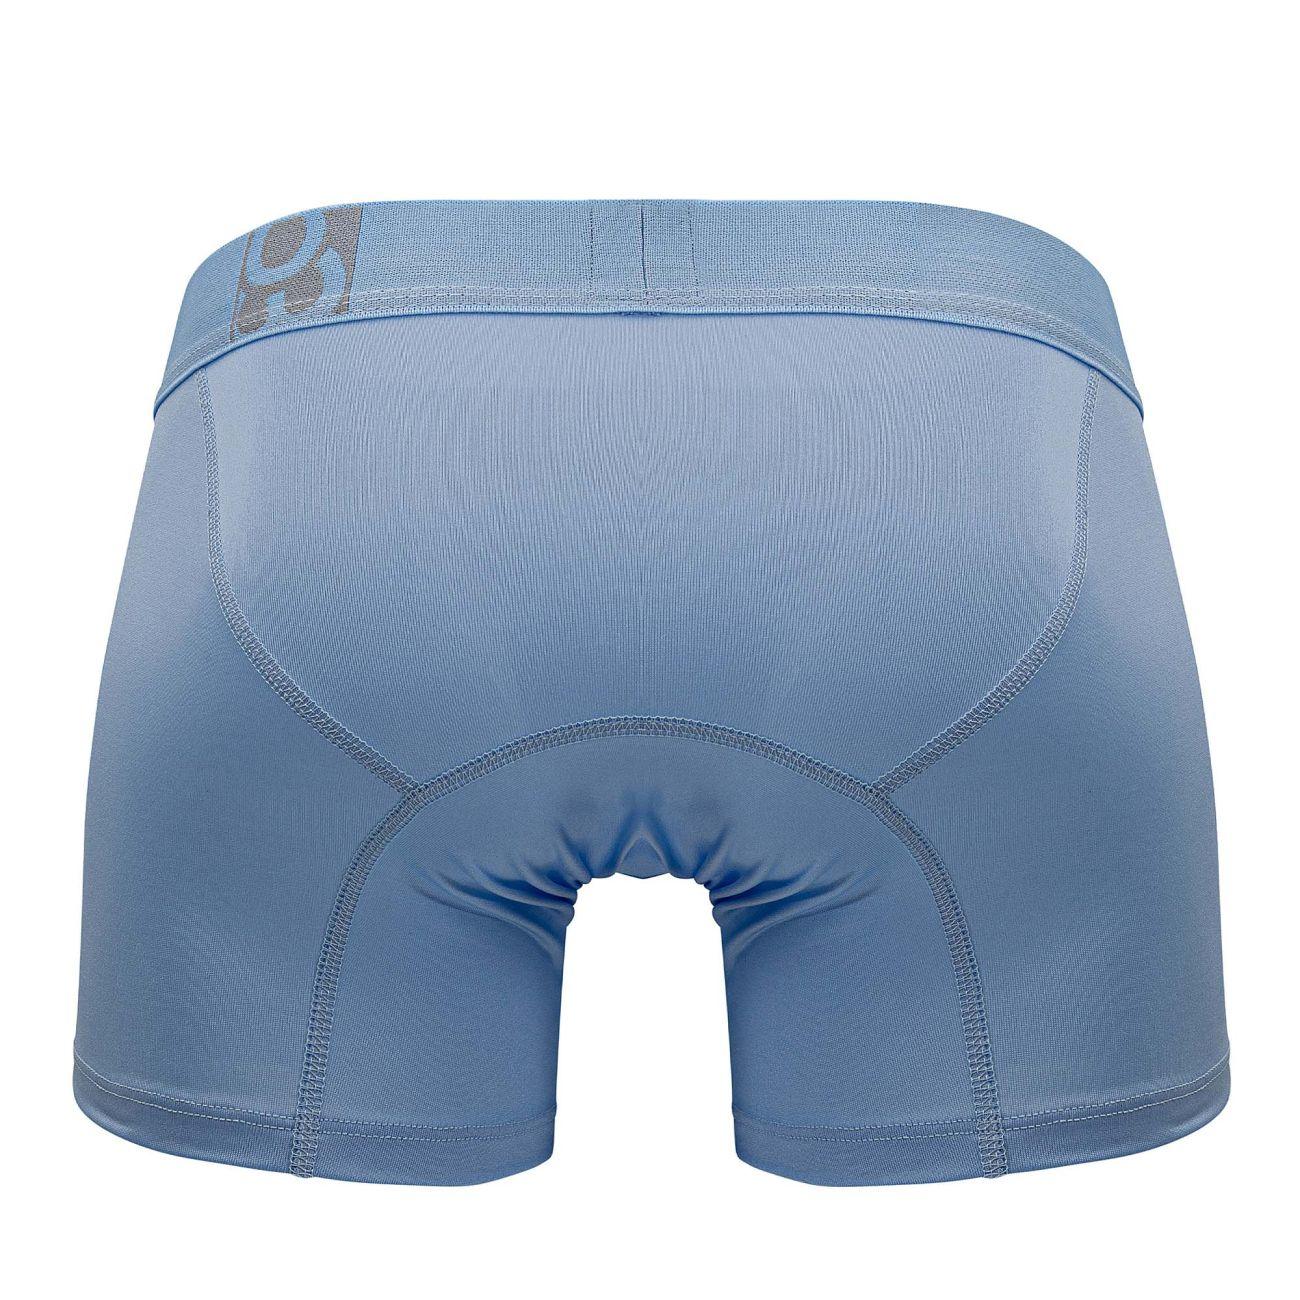 image of product,HIP Trunks - SEXYEONE